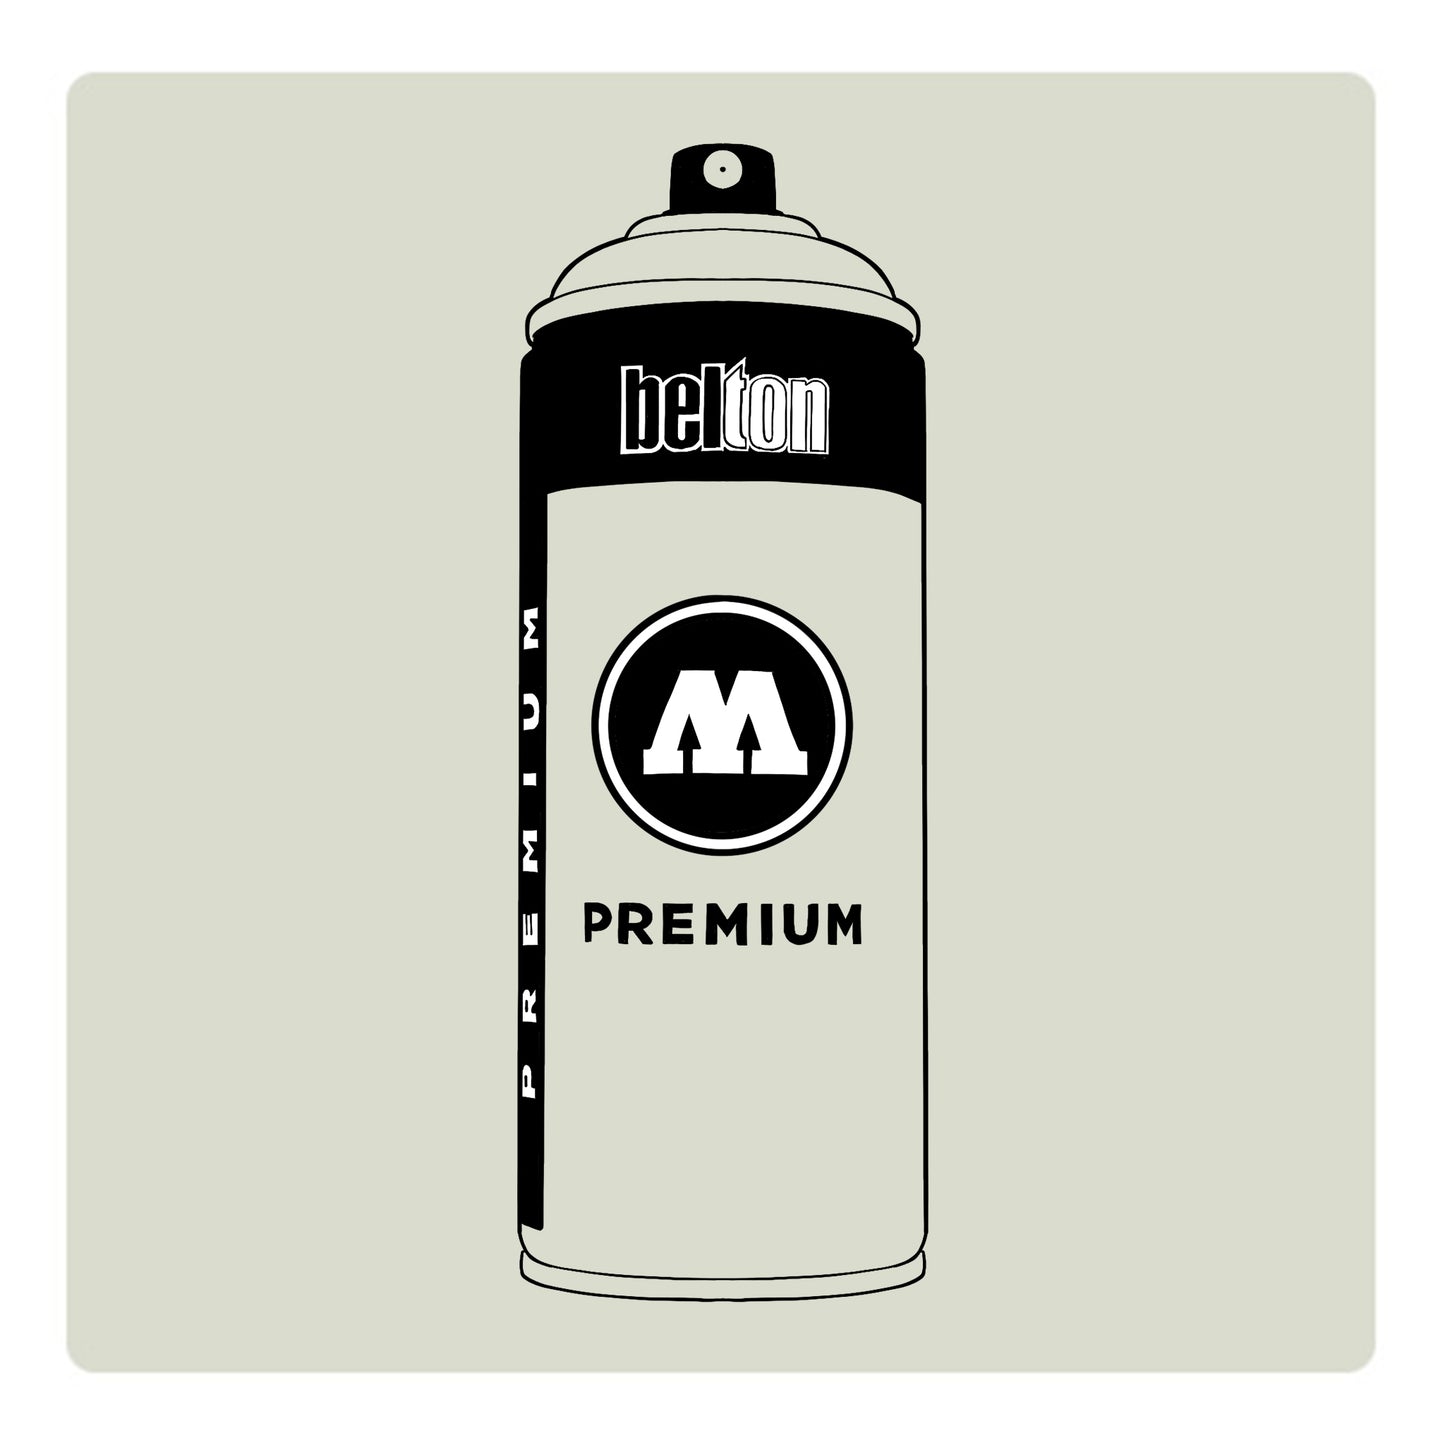 A black outline drawing of a light mint grey spray paint can with the words "belton","premium" and the letter"M" written on the face in black and white font. The background is a color swatch of the same light mint green with a white border